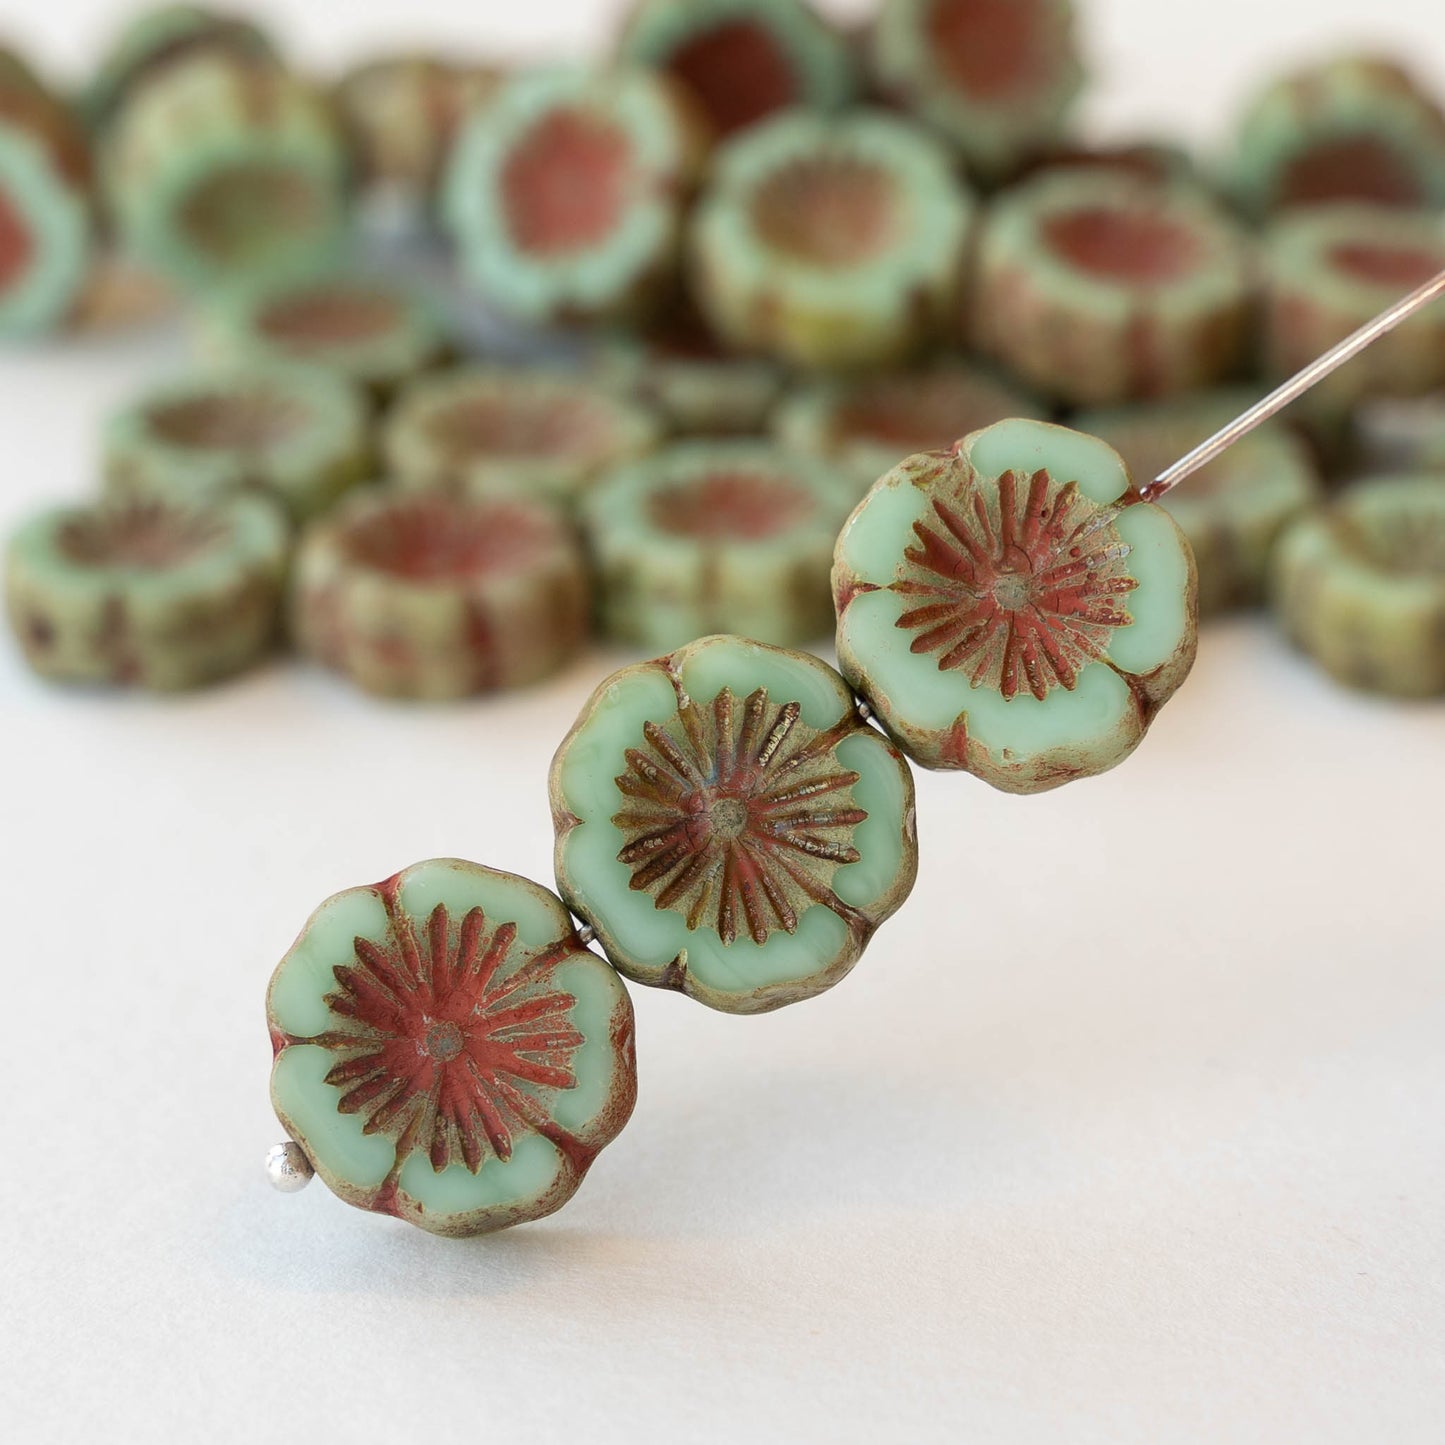 14mm Hibiscus Flower Beads - Seafoam Green Red, Picasso Finish - 10 Beads